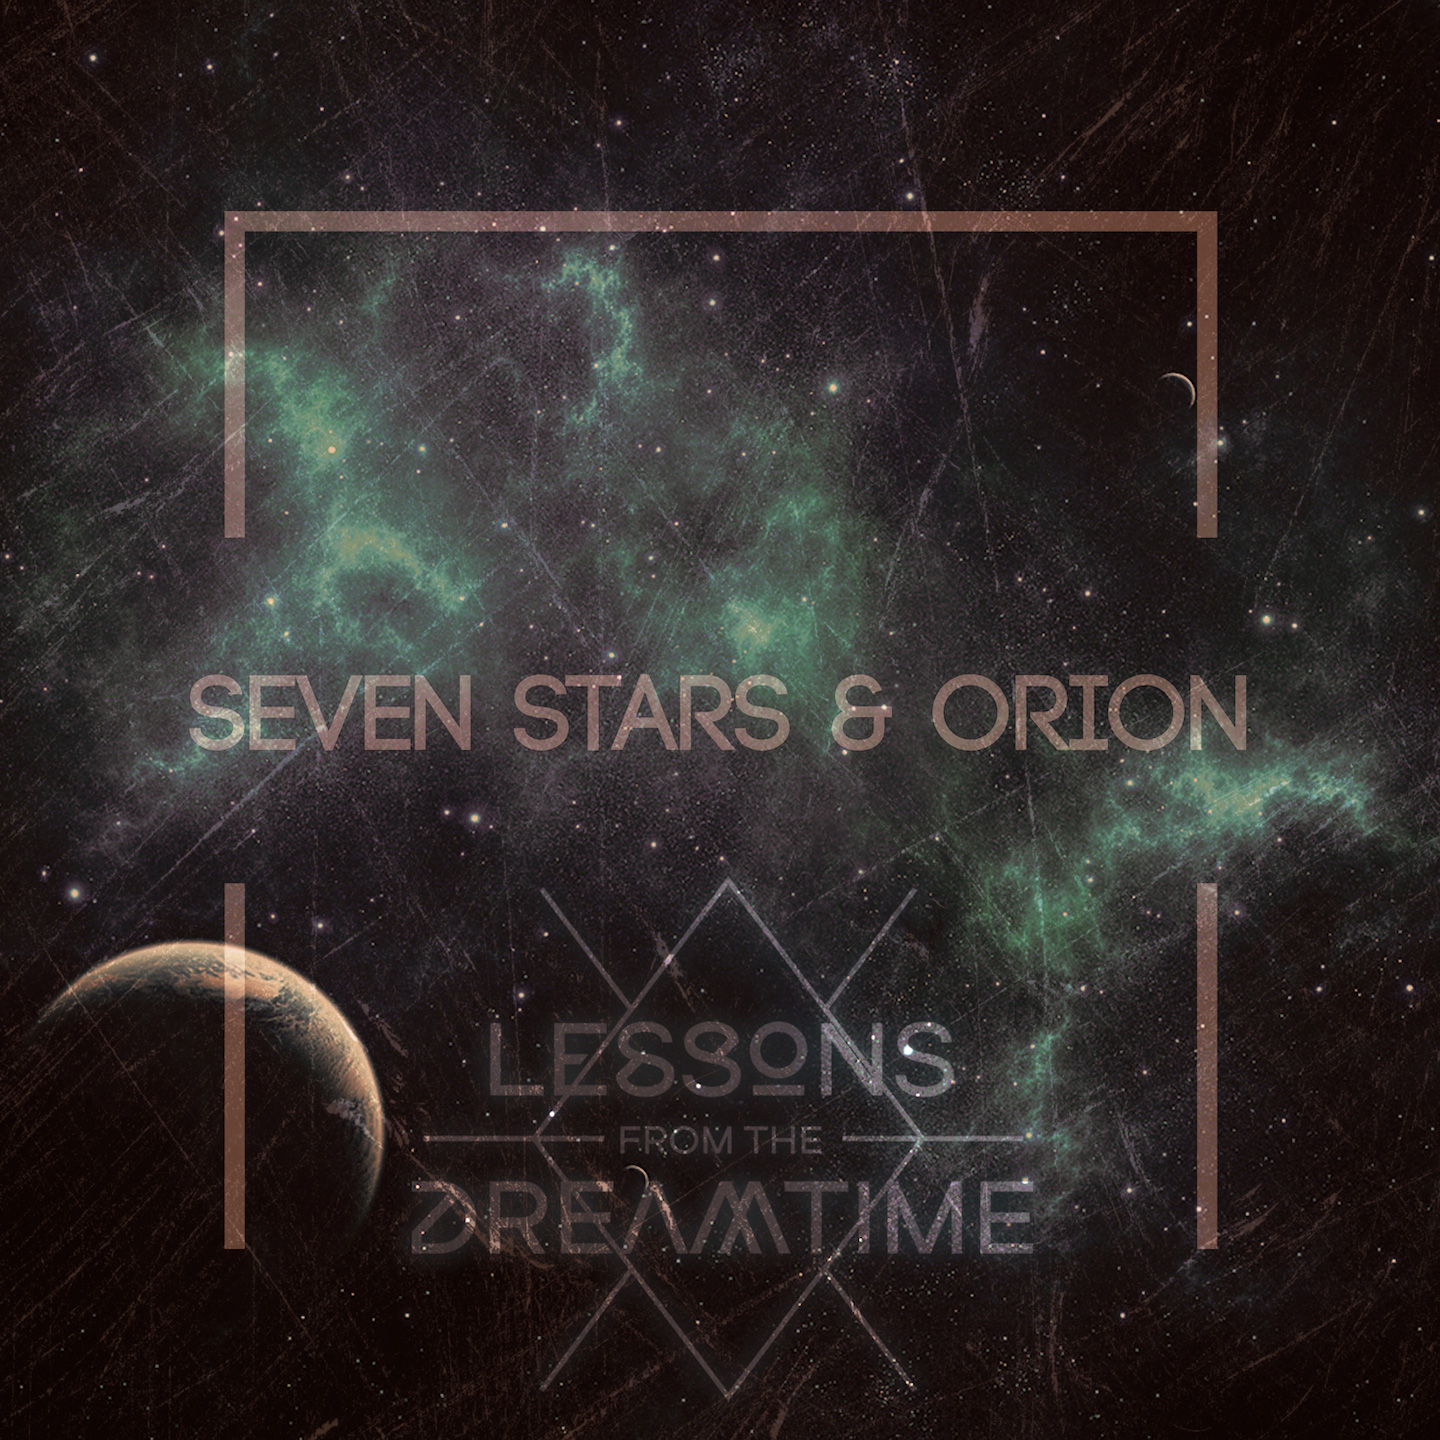 Lessons From The Dreamtime – Seven Stars & Orion